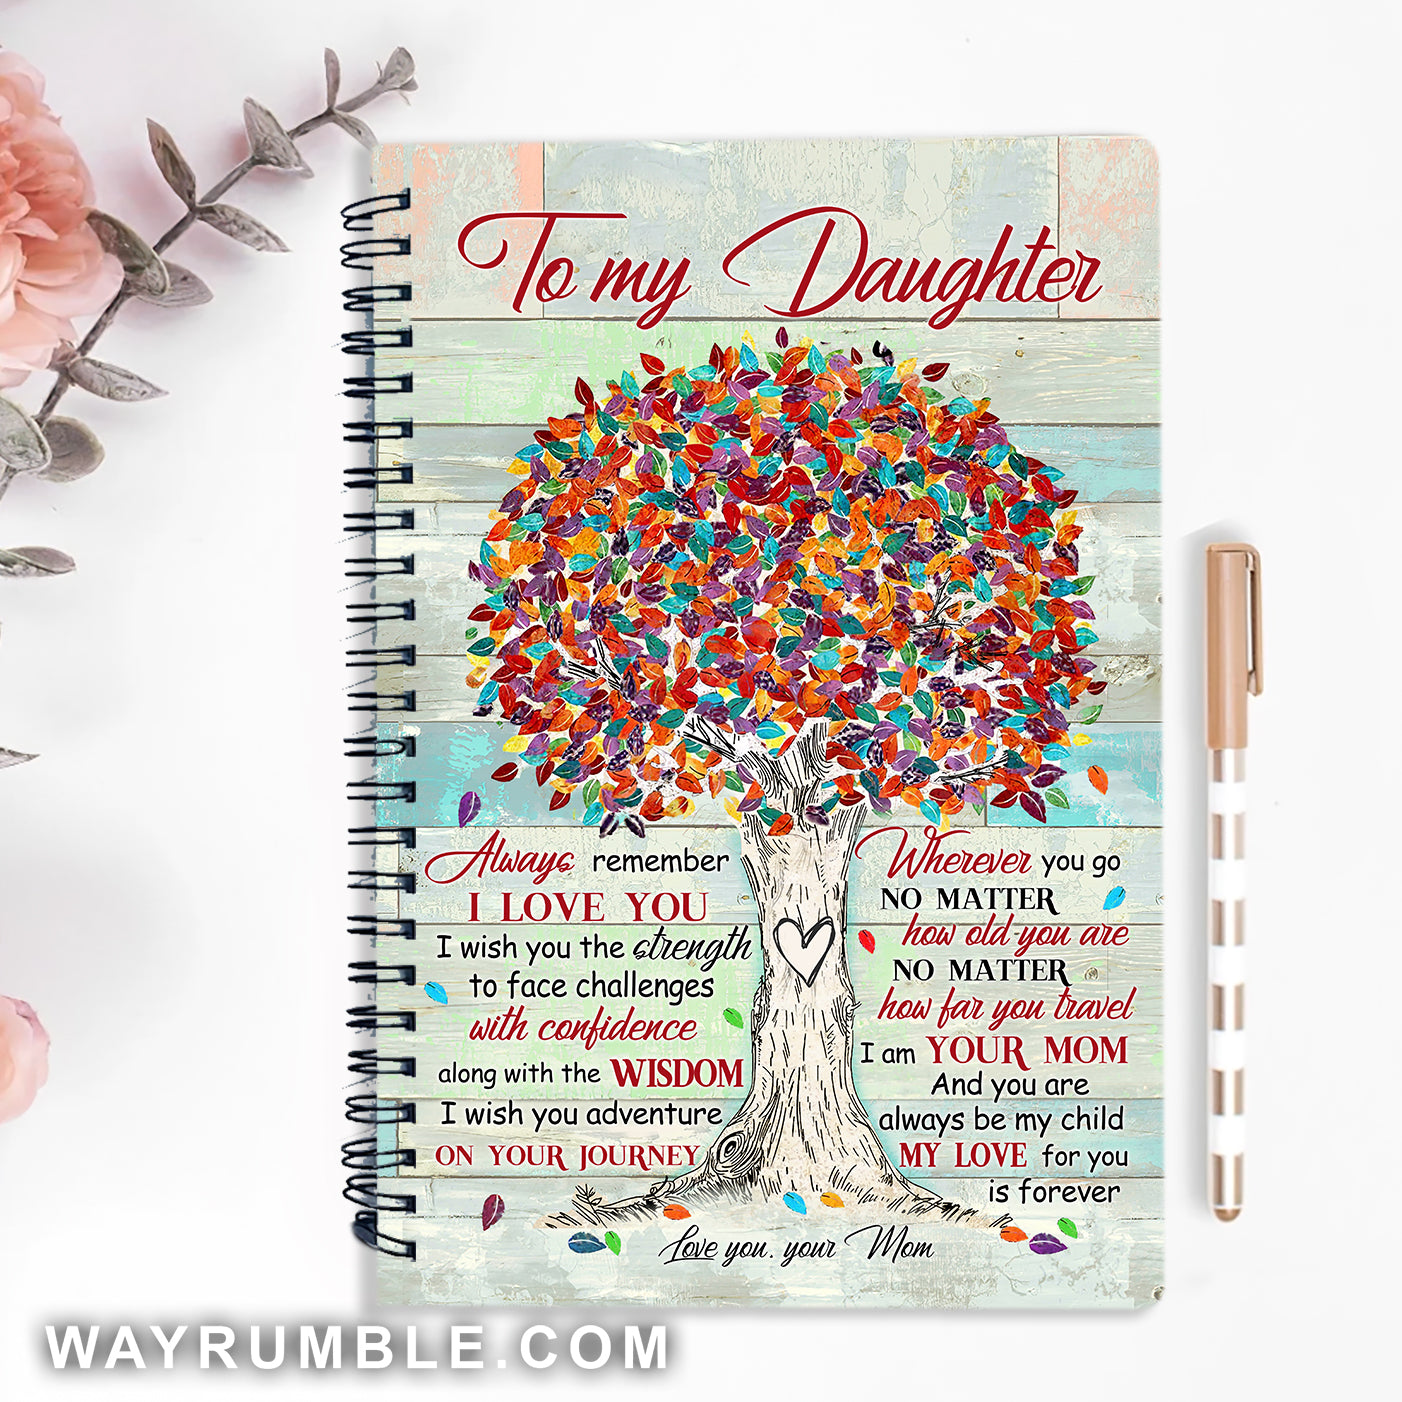 Gift for daughter from mom, You are always be my child - Family, Autumn tree Spiral Journal